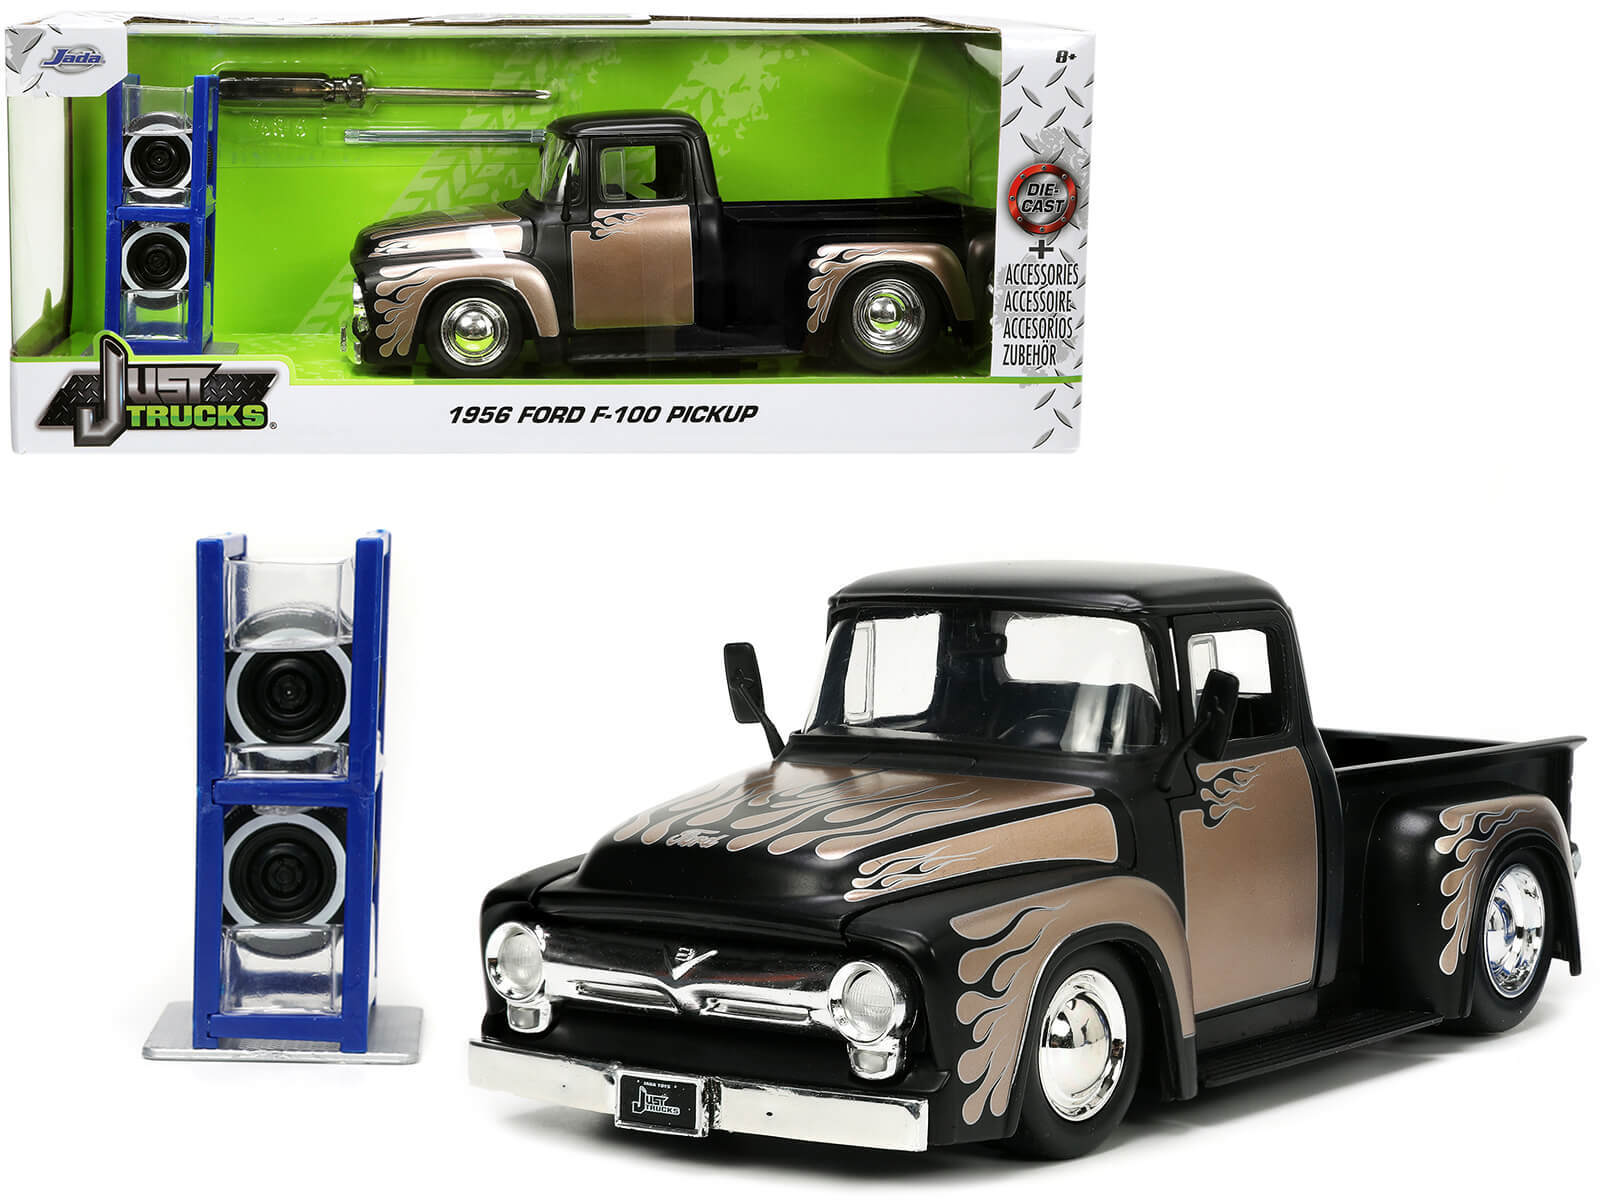 1956 Ford F-100 Pickup Truck Matt Black and Champagne with Flames with Extra Wheels "Just Trucks" Series 1/24 Diecast Model Car by Jada